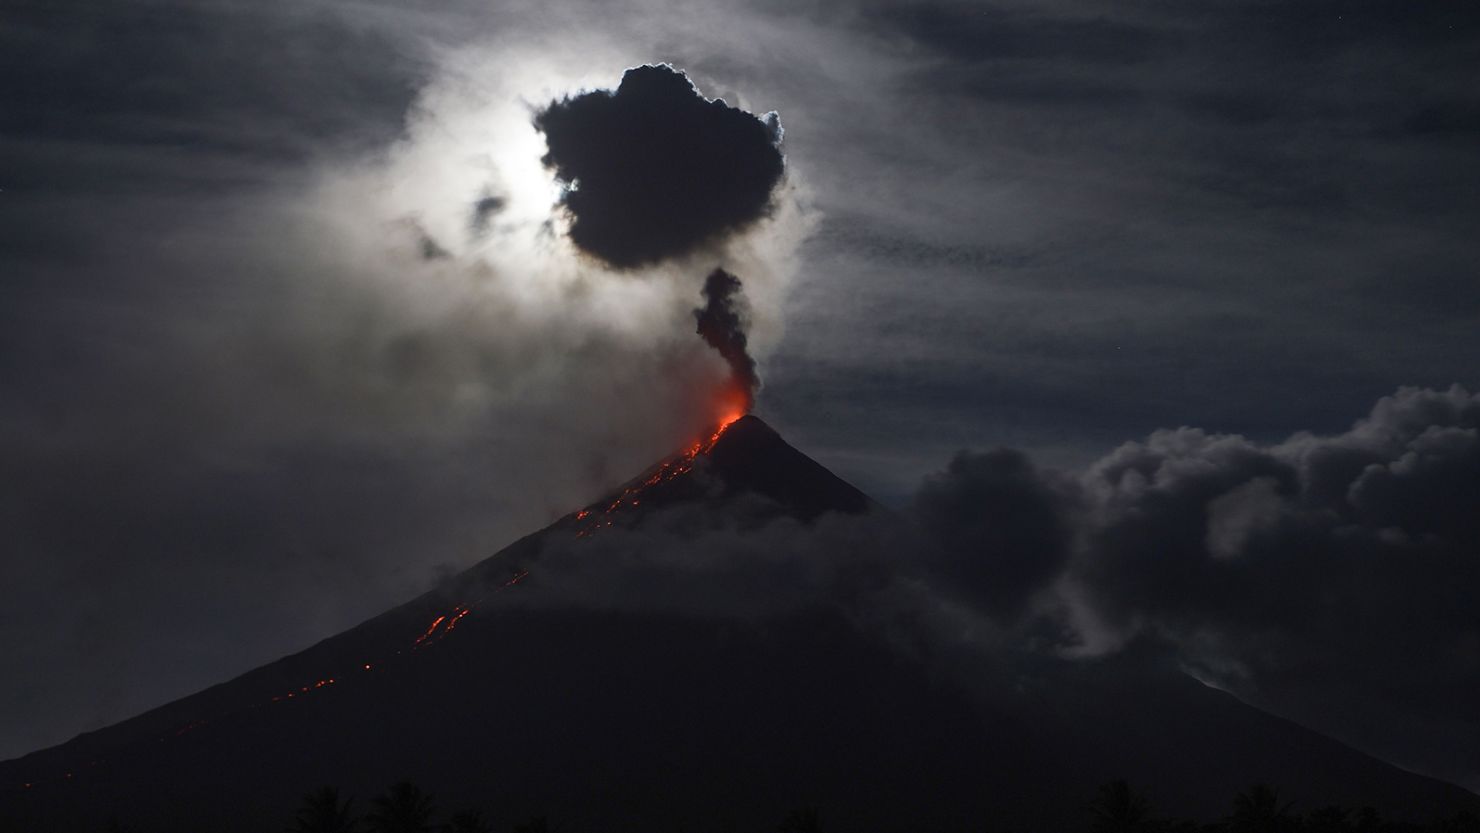 The moon, obscured by clouds, illuminates the Mayon volcano as it spews ash near Legazpi City in the Philippines on February 1, 2018.